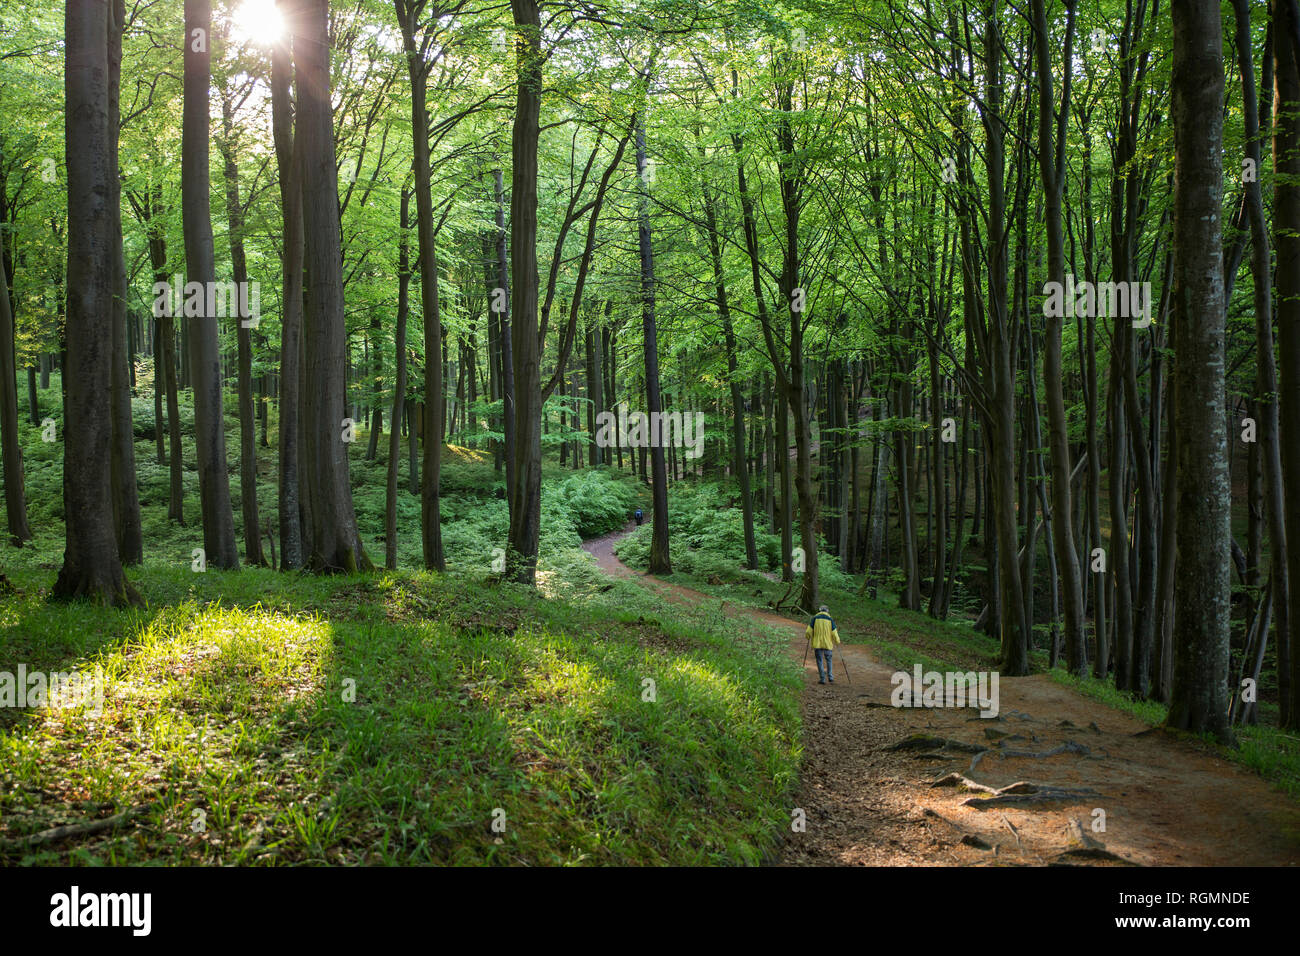 Germany, Mecklenburg-Western Pomerania, Ruegen, Jasmund National Park, hikers in beech forest on hiking trail Stock Photo